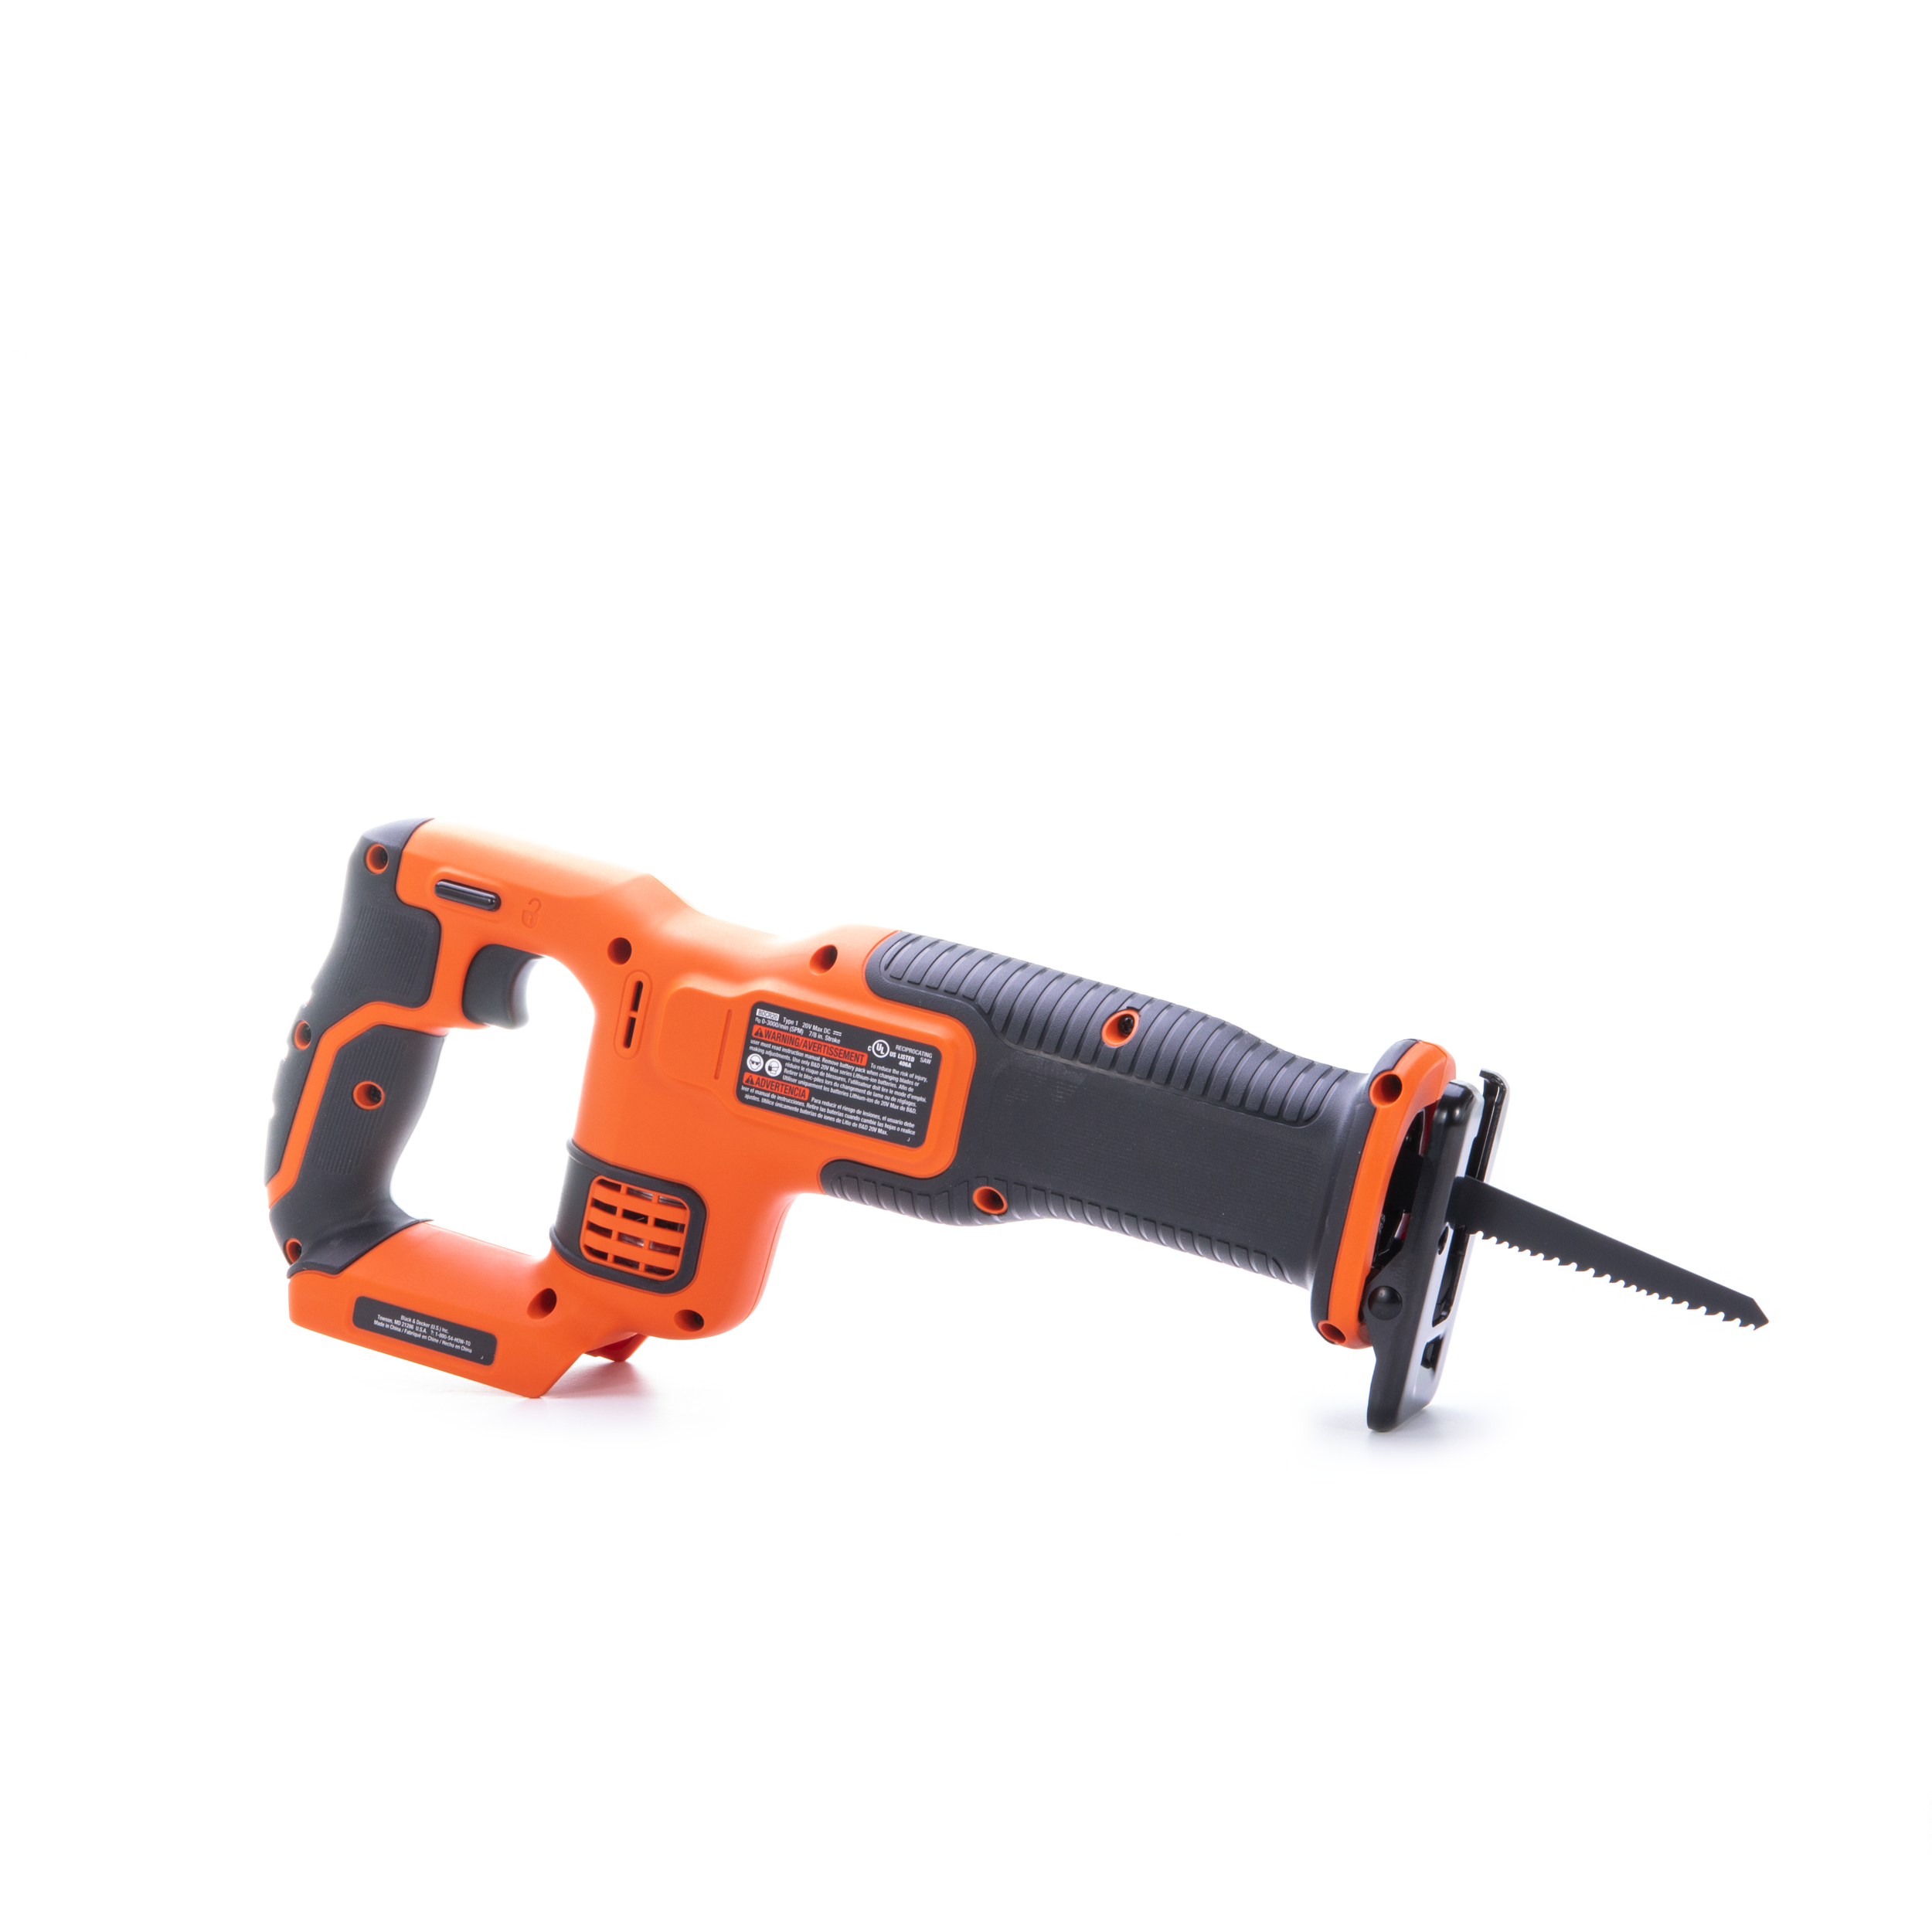 BLACK+DECKER 20V MAX Reciprocating Saw with Lithium Battery & Charger  (BDCR20B & LBXR20CK) 